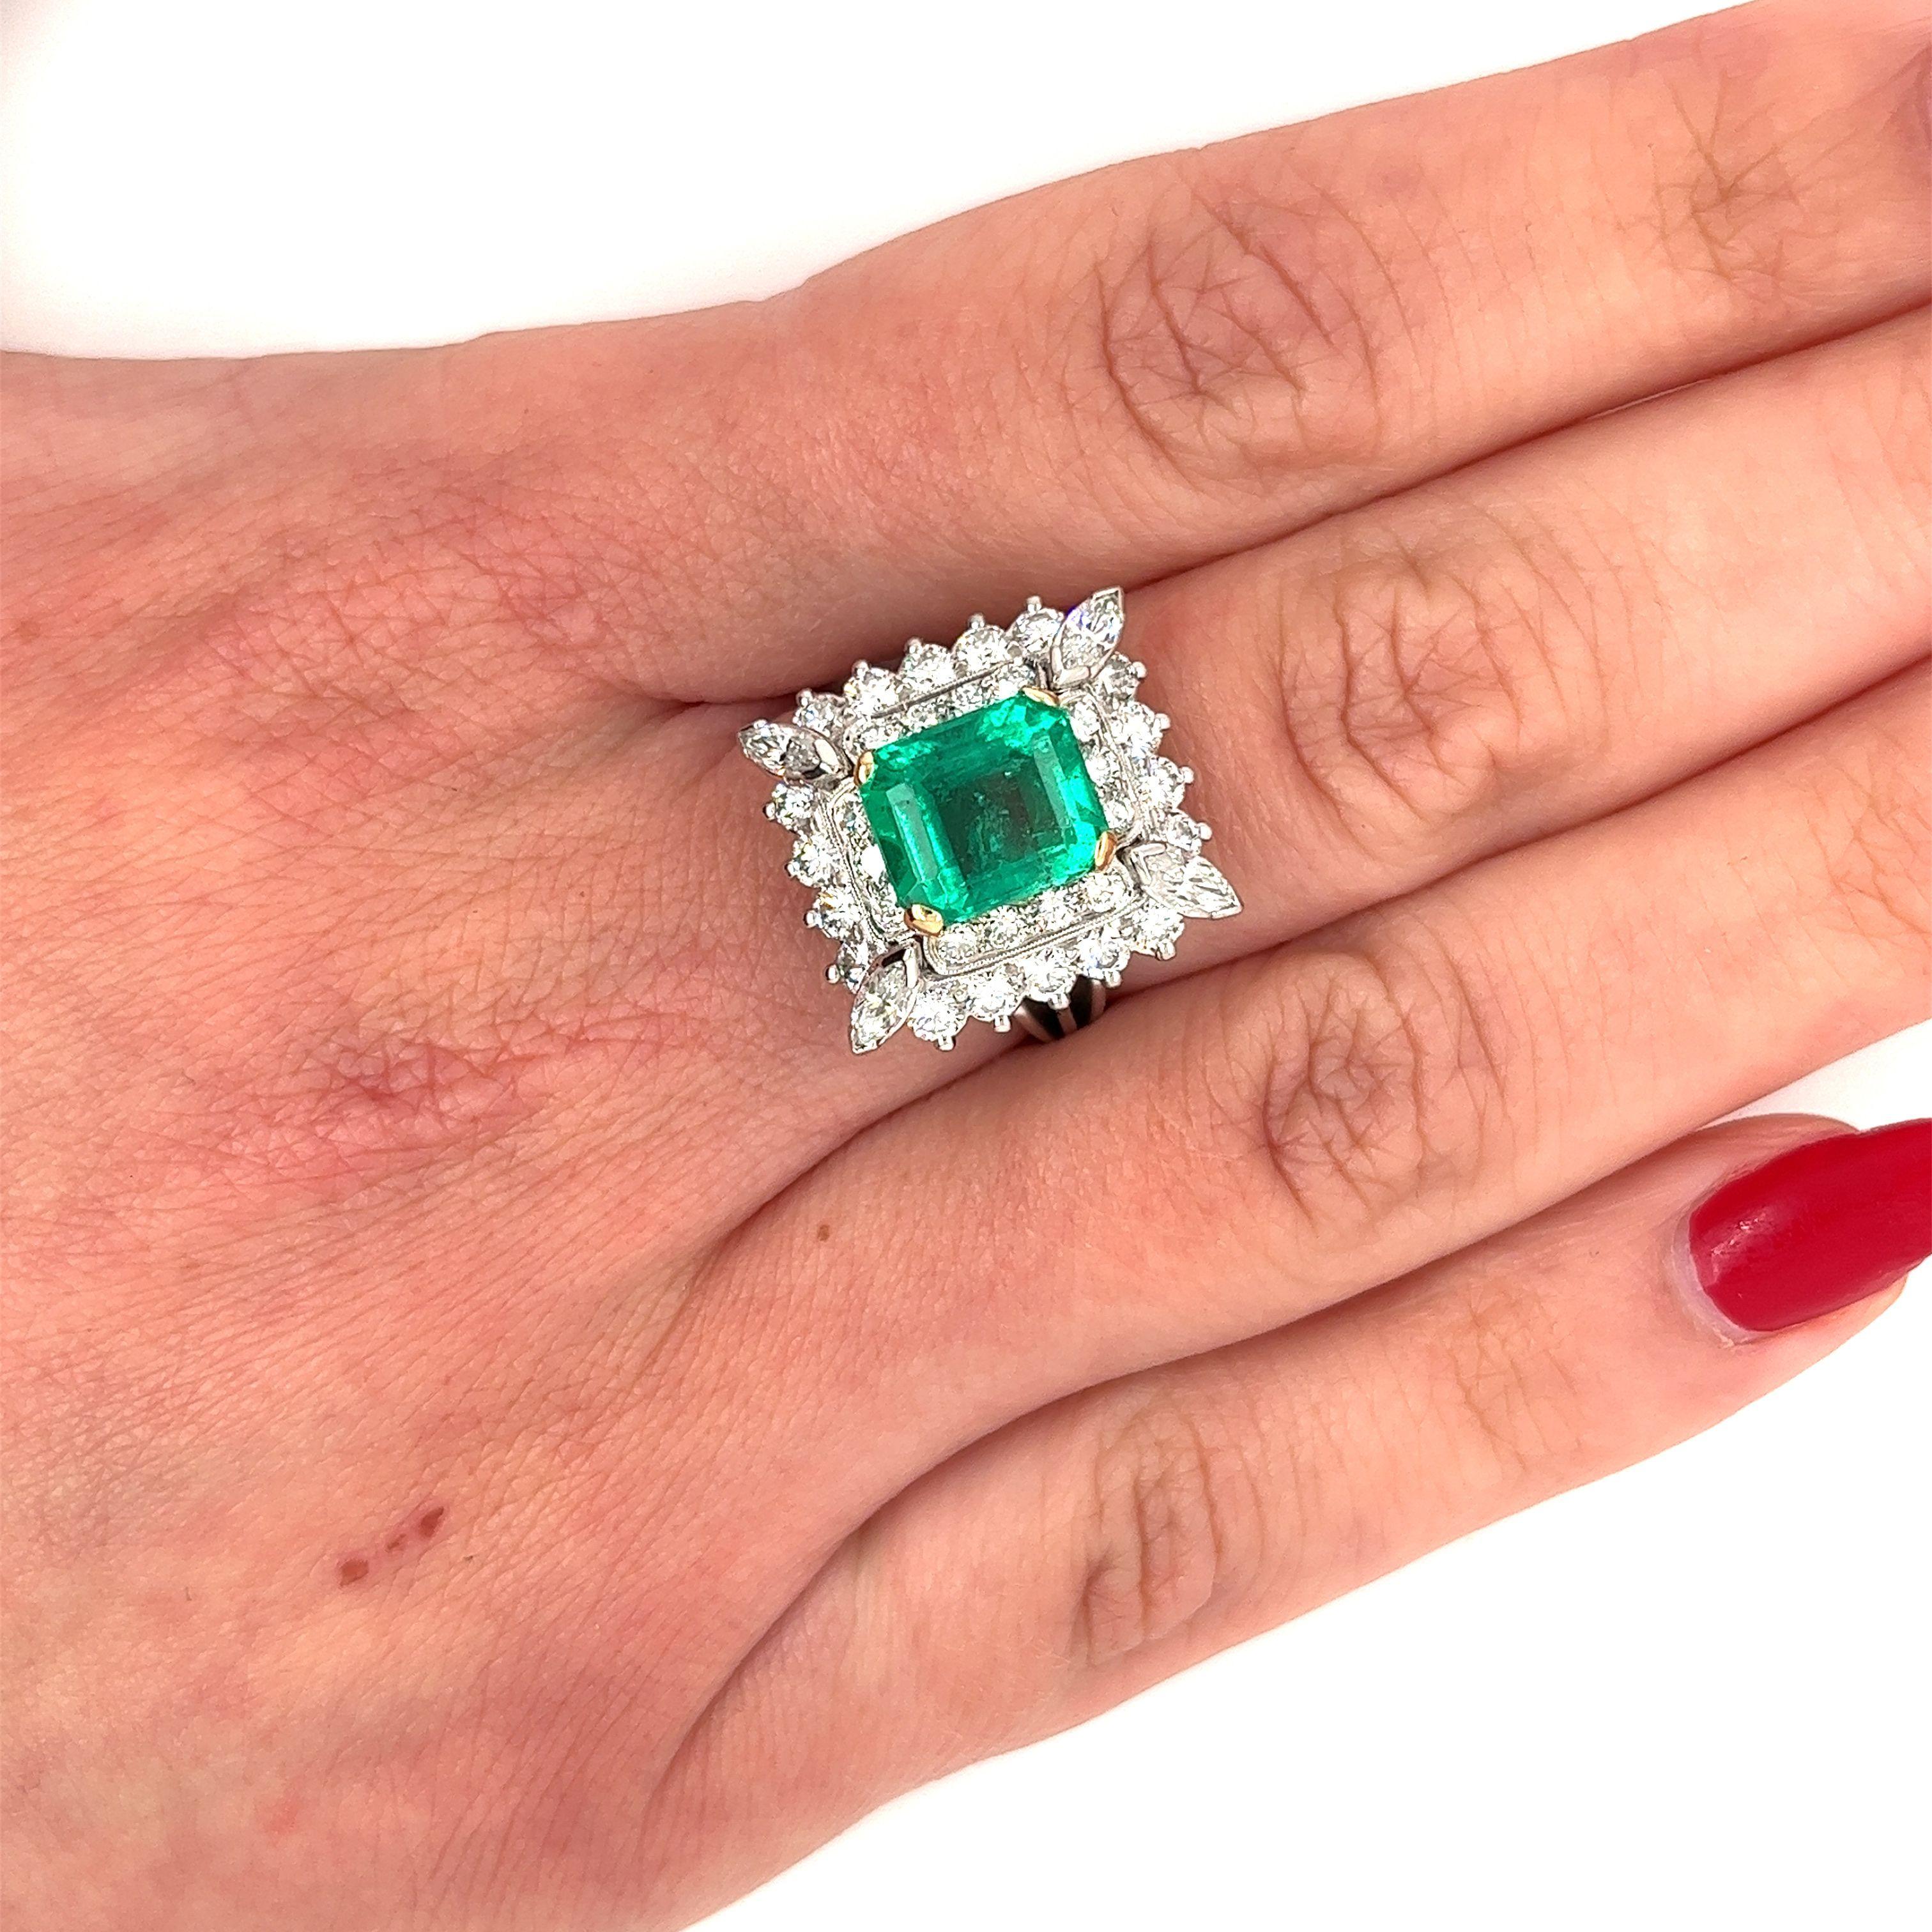 3.31 Carat Colombian Emerald & Diamond Halo Cocktail Ring in Platinum Setting For Sale 1